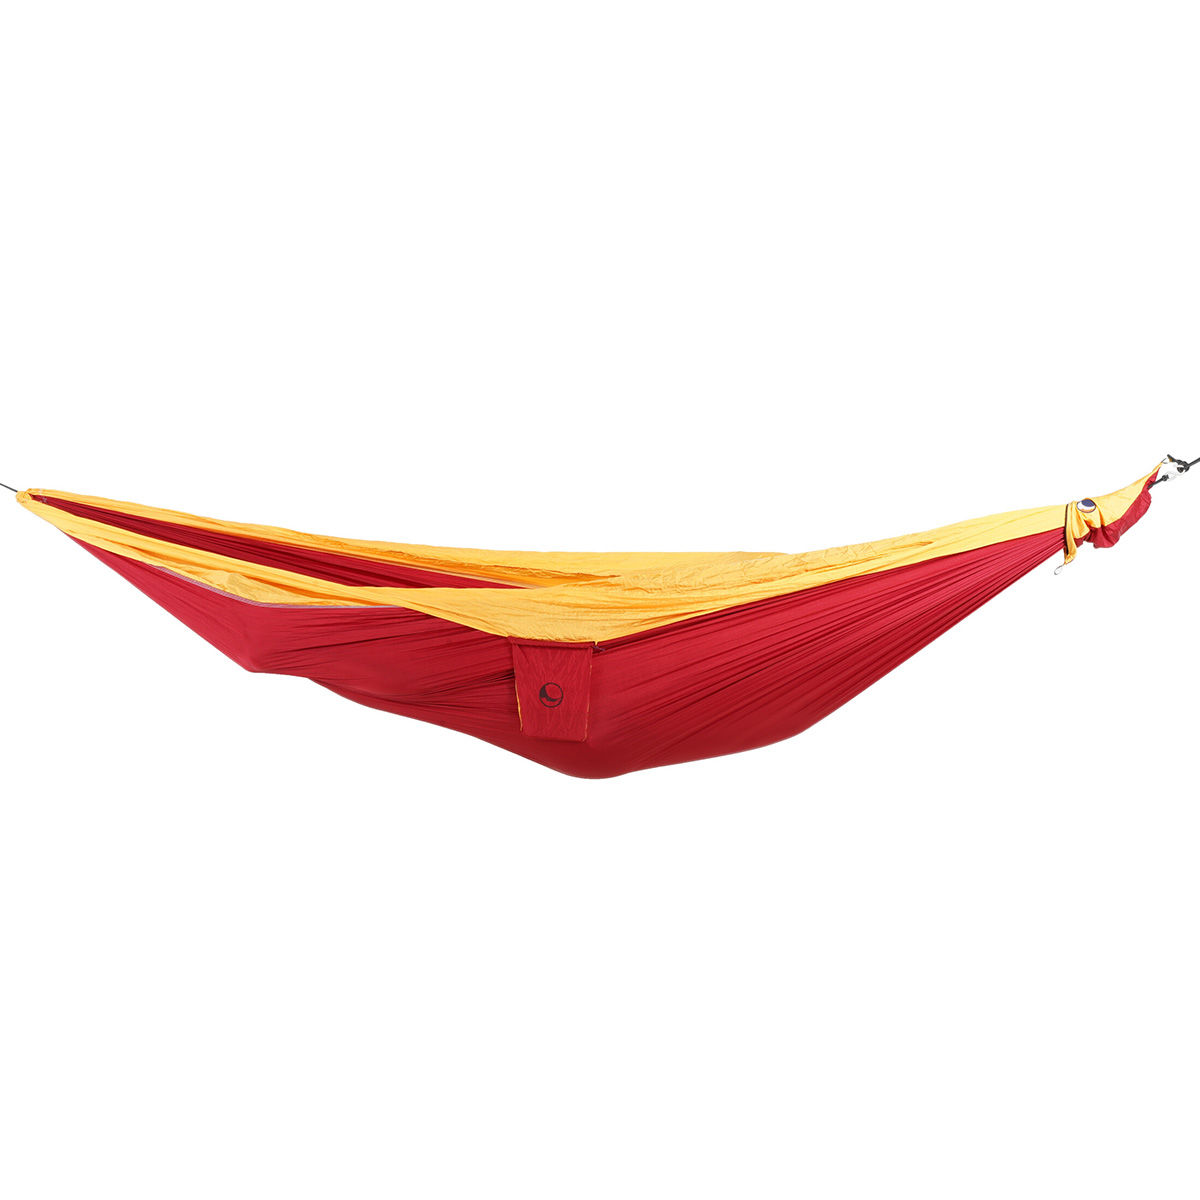 Ticket to the Moon King Size hammock